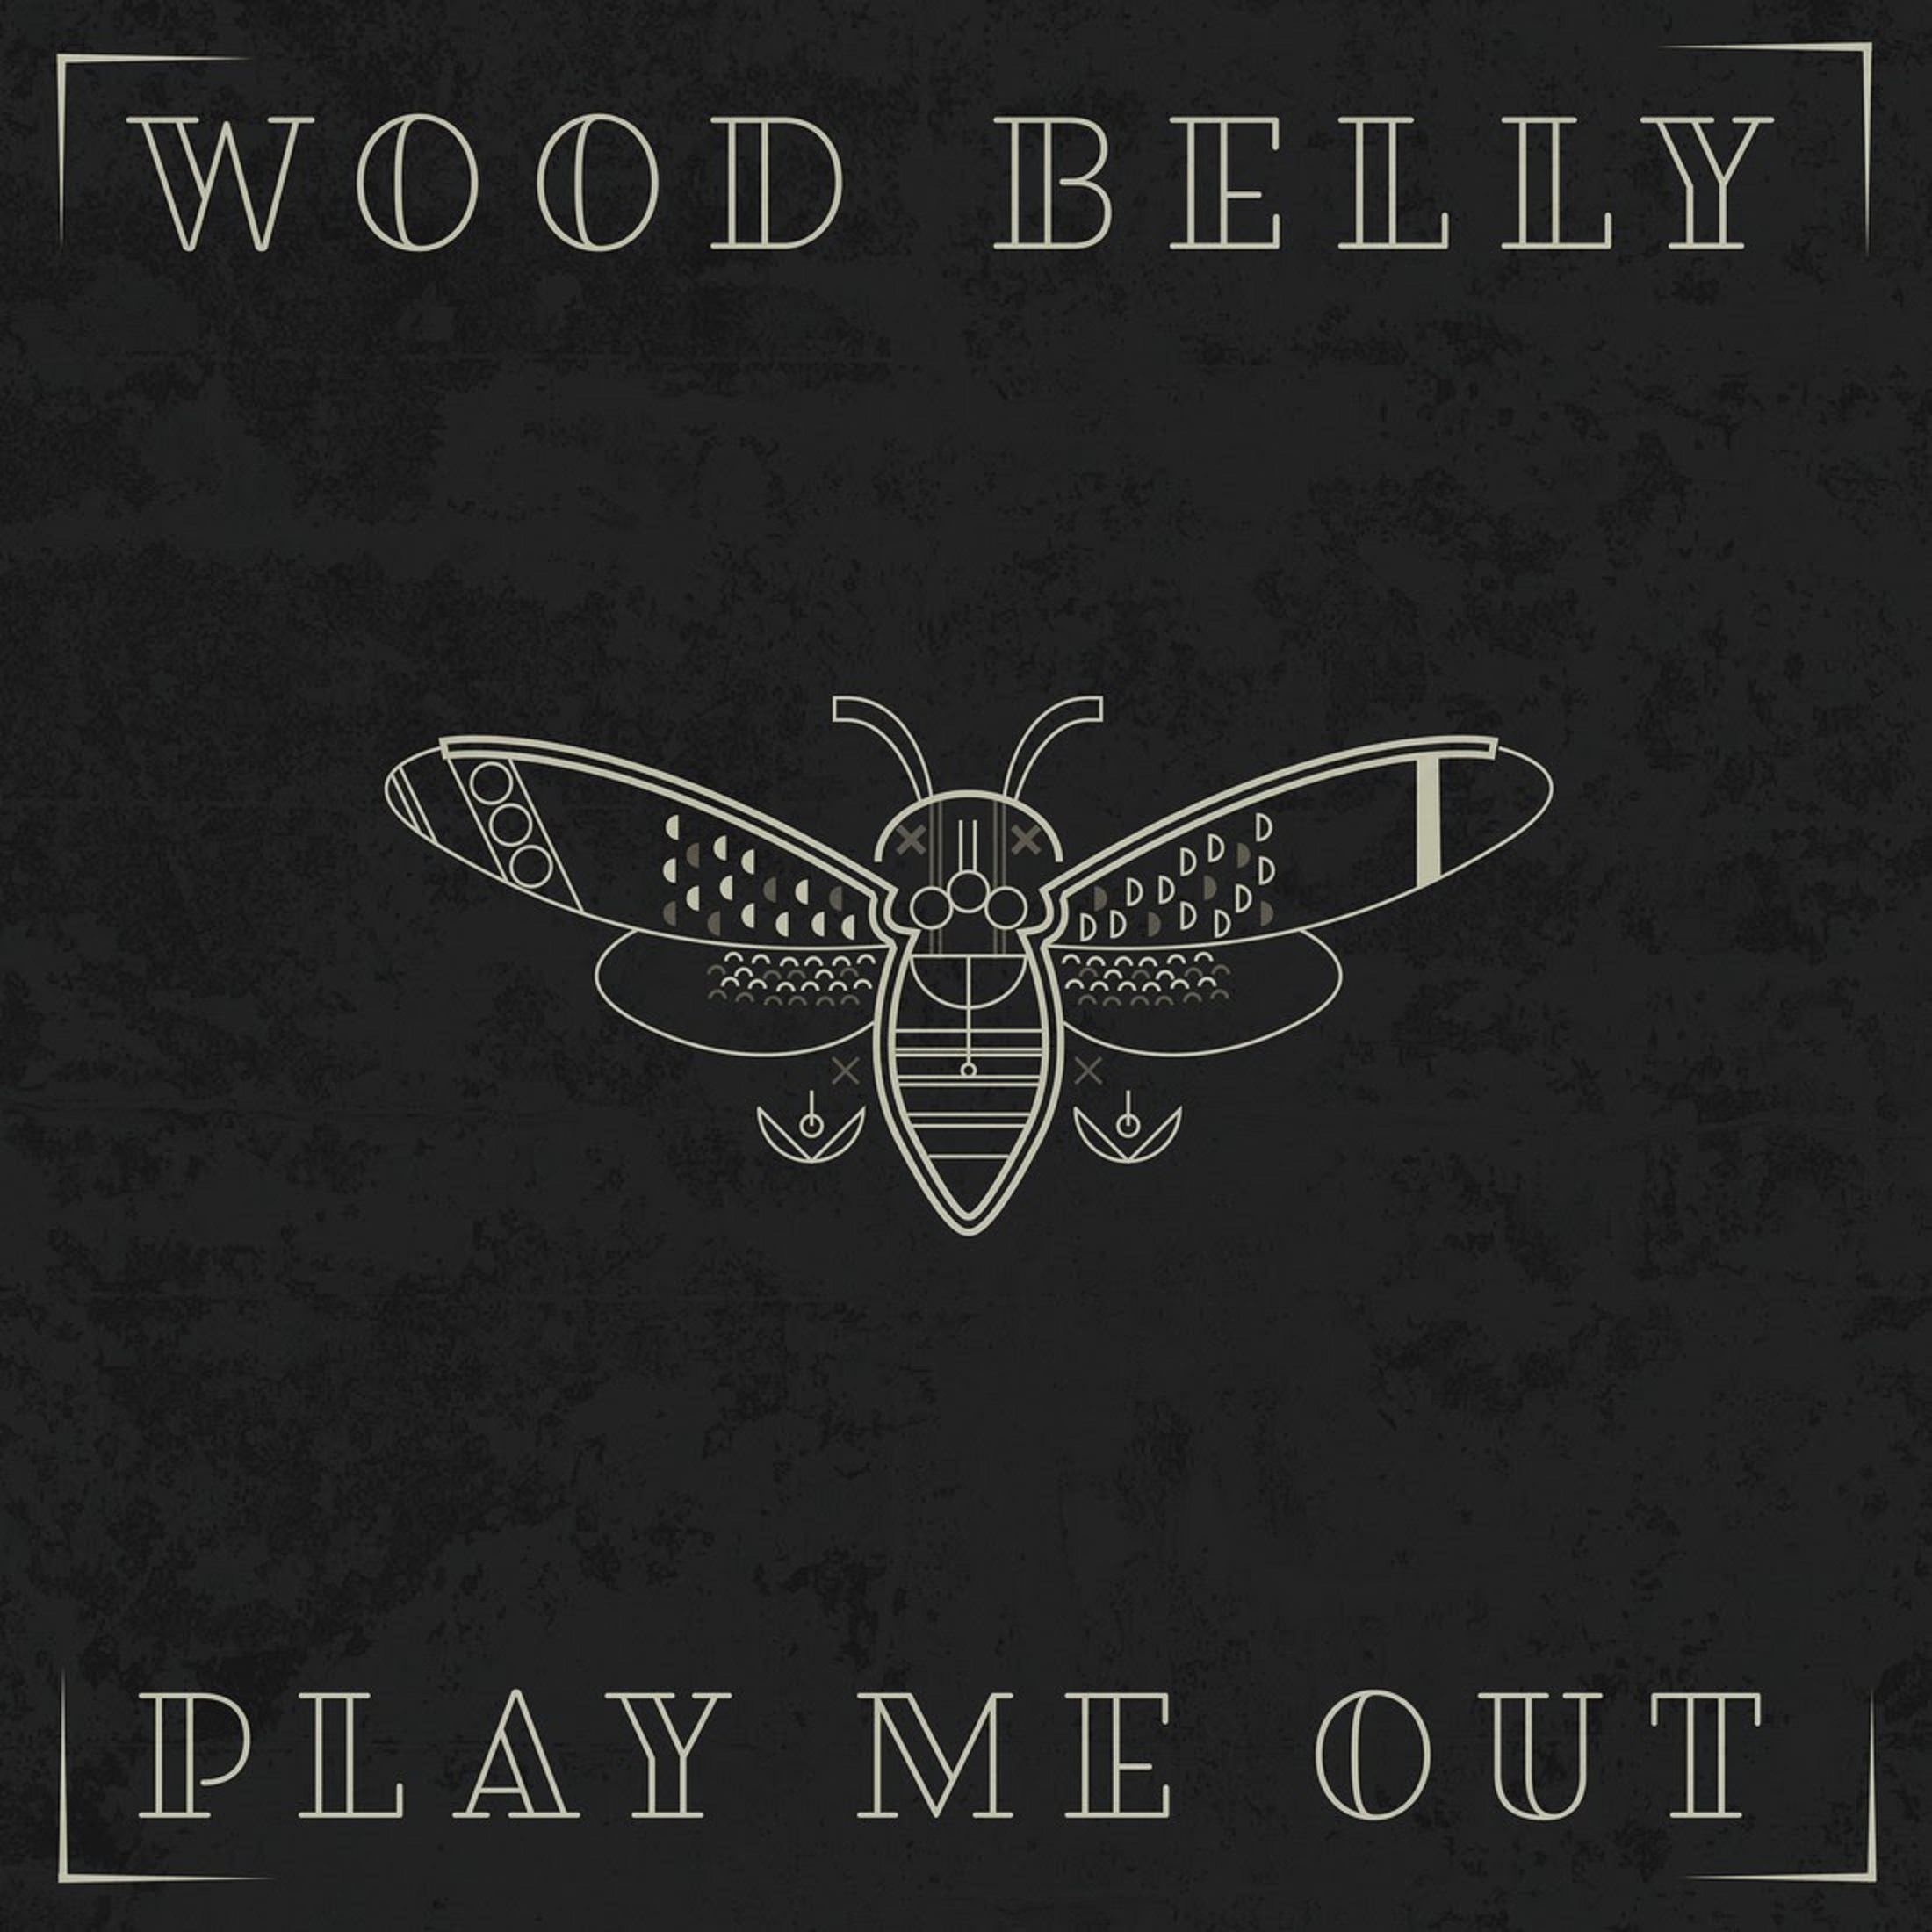 Colorado Bluegrass & Americana Band Wood Belly Release “Play Me Out,” the First Single with Their Expanded 5-Piece Lineup